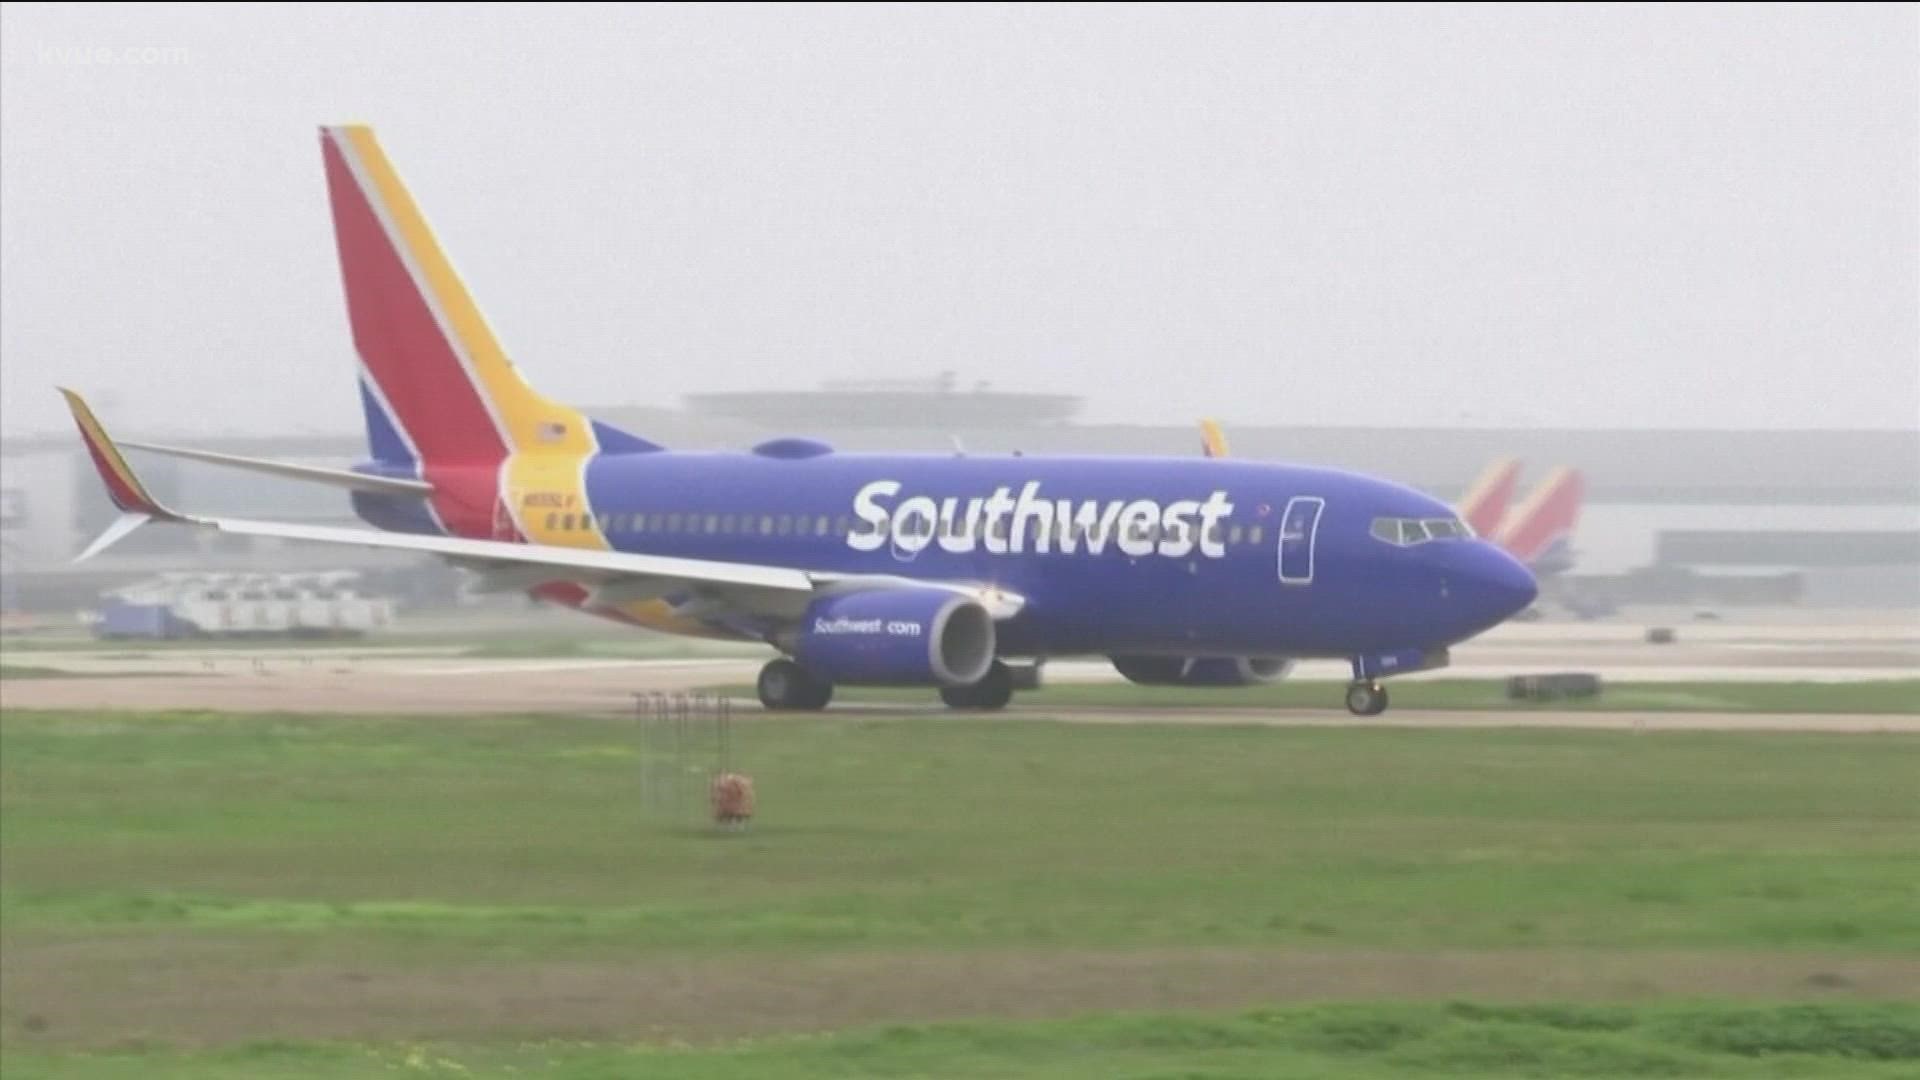 Over the weekend, Southwest Airlines canceled dozens of flights from Austin's airport.